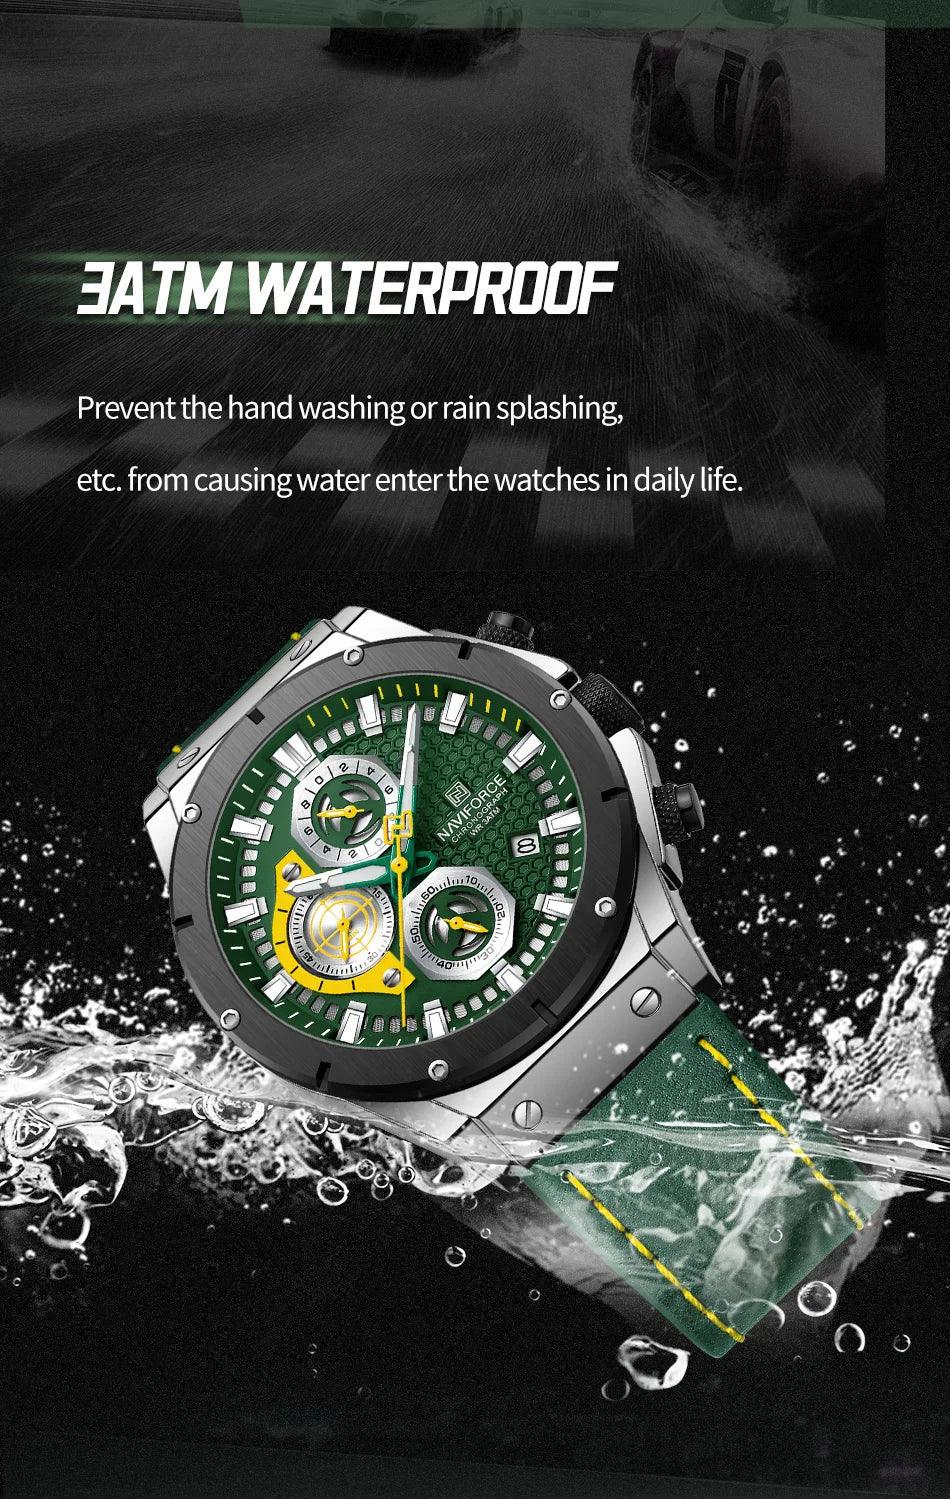 New Arrival Top Brand Military Fashion Waterproof Luxury Leather Strap Quartz Men Wristwatches - The Jewellery Supermarket